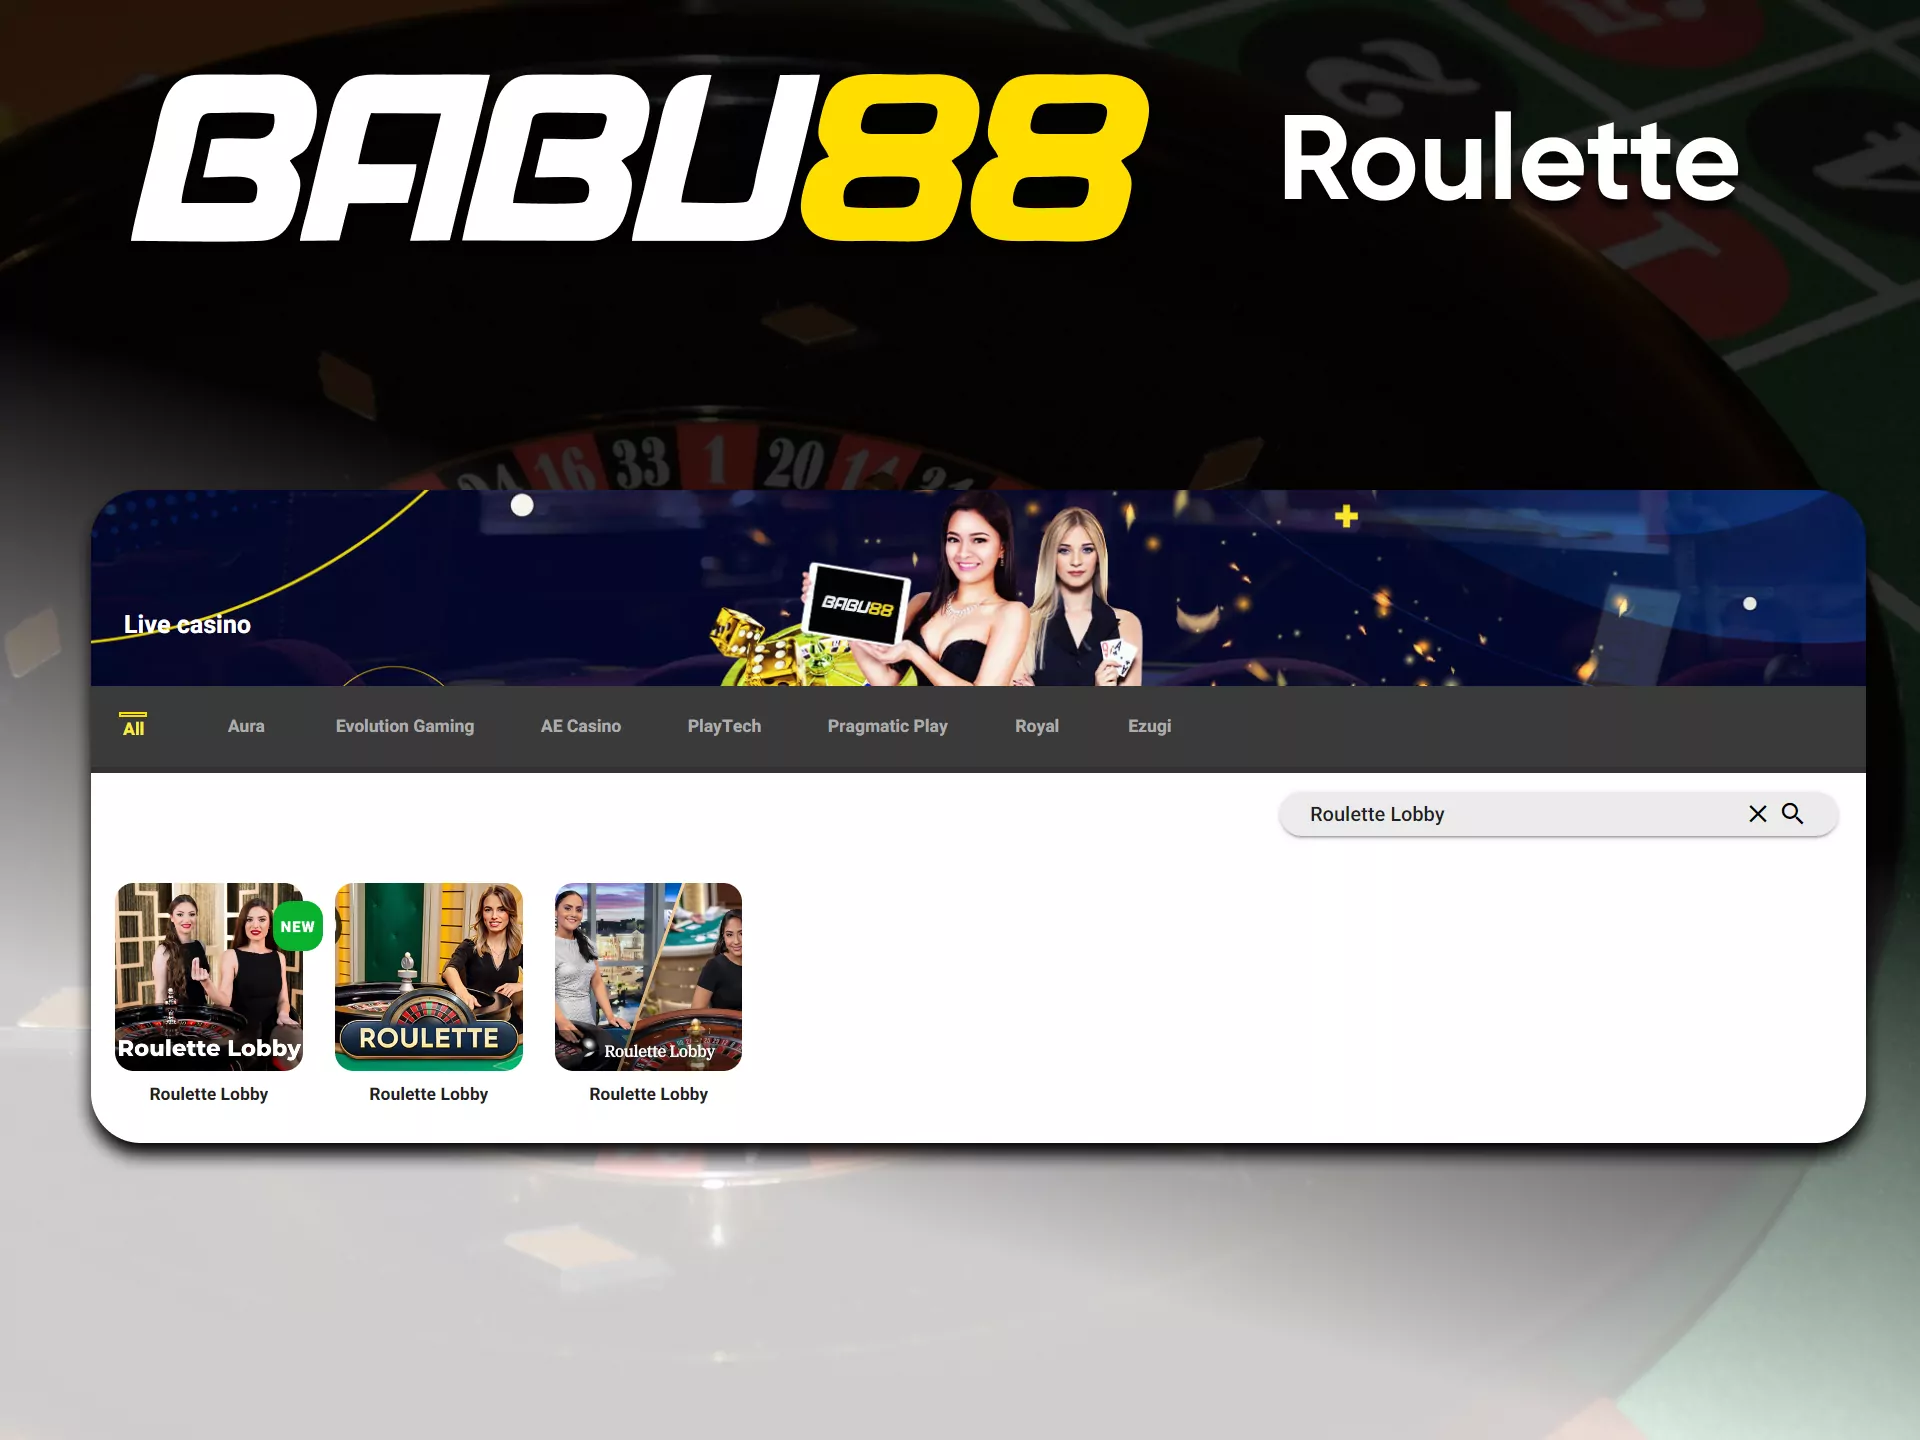 On the Babu88 you can play Roulette.